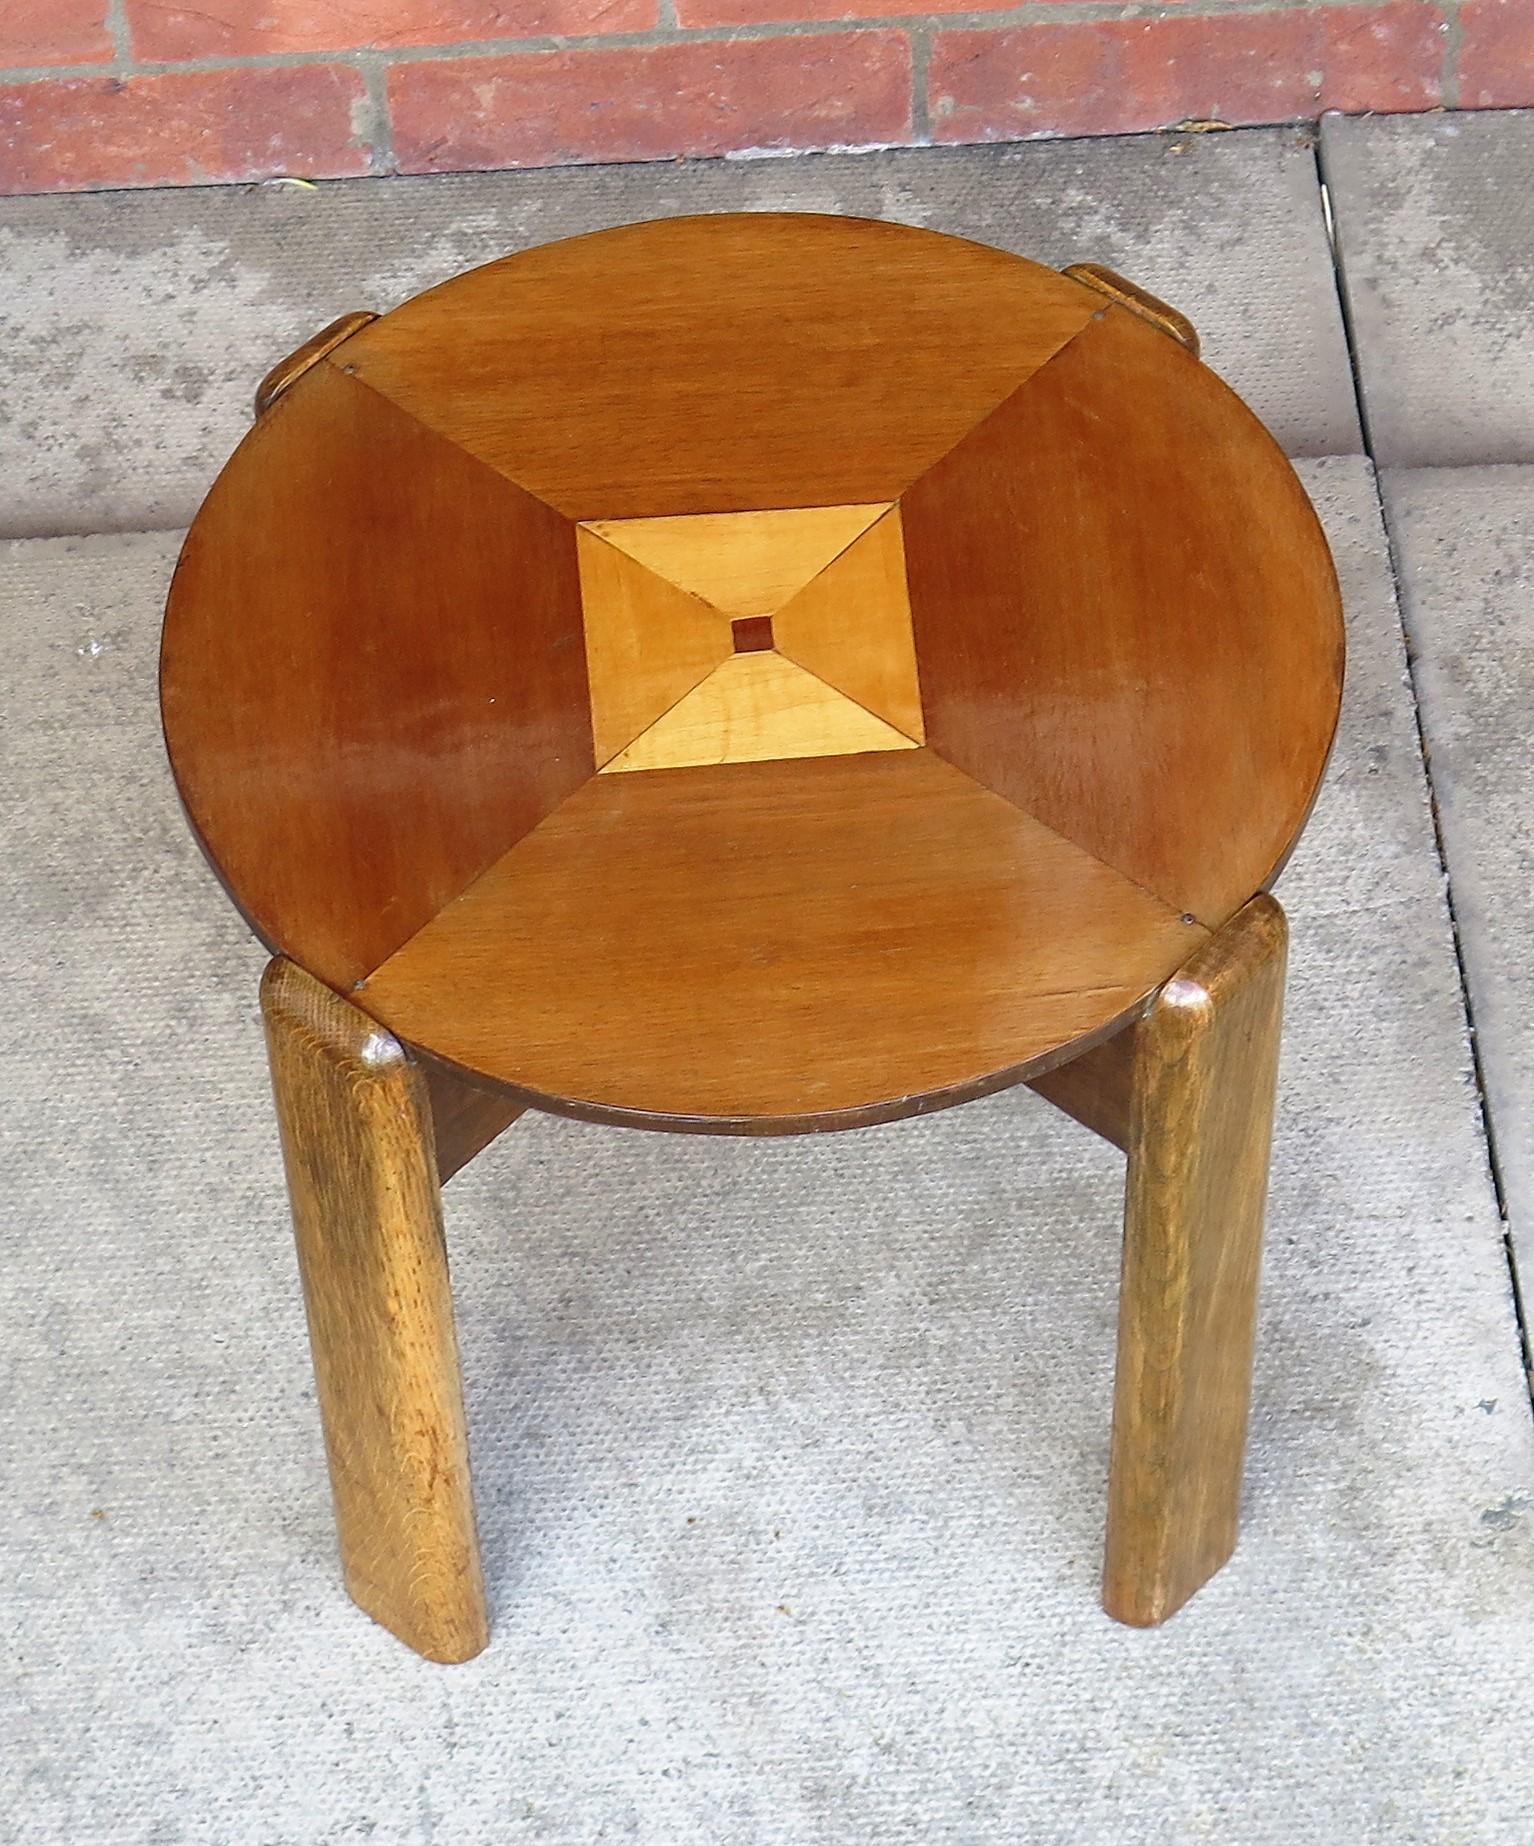 Art Deco Period Occasional Table with Quarter Veneered Top and Oak Legs, Ca 1930 For Sale 1